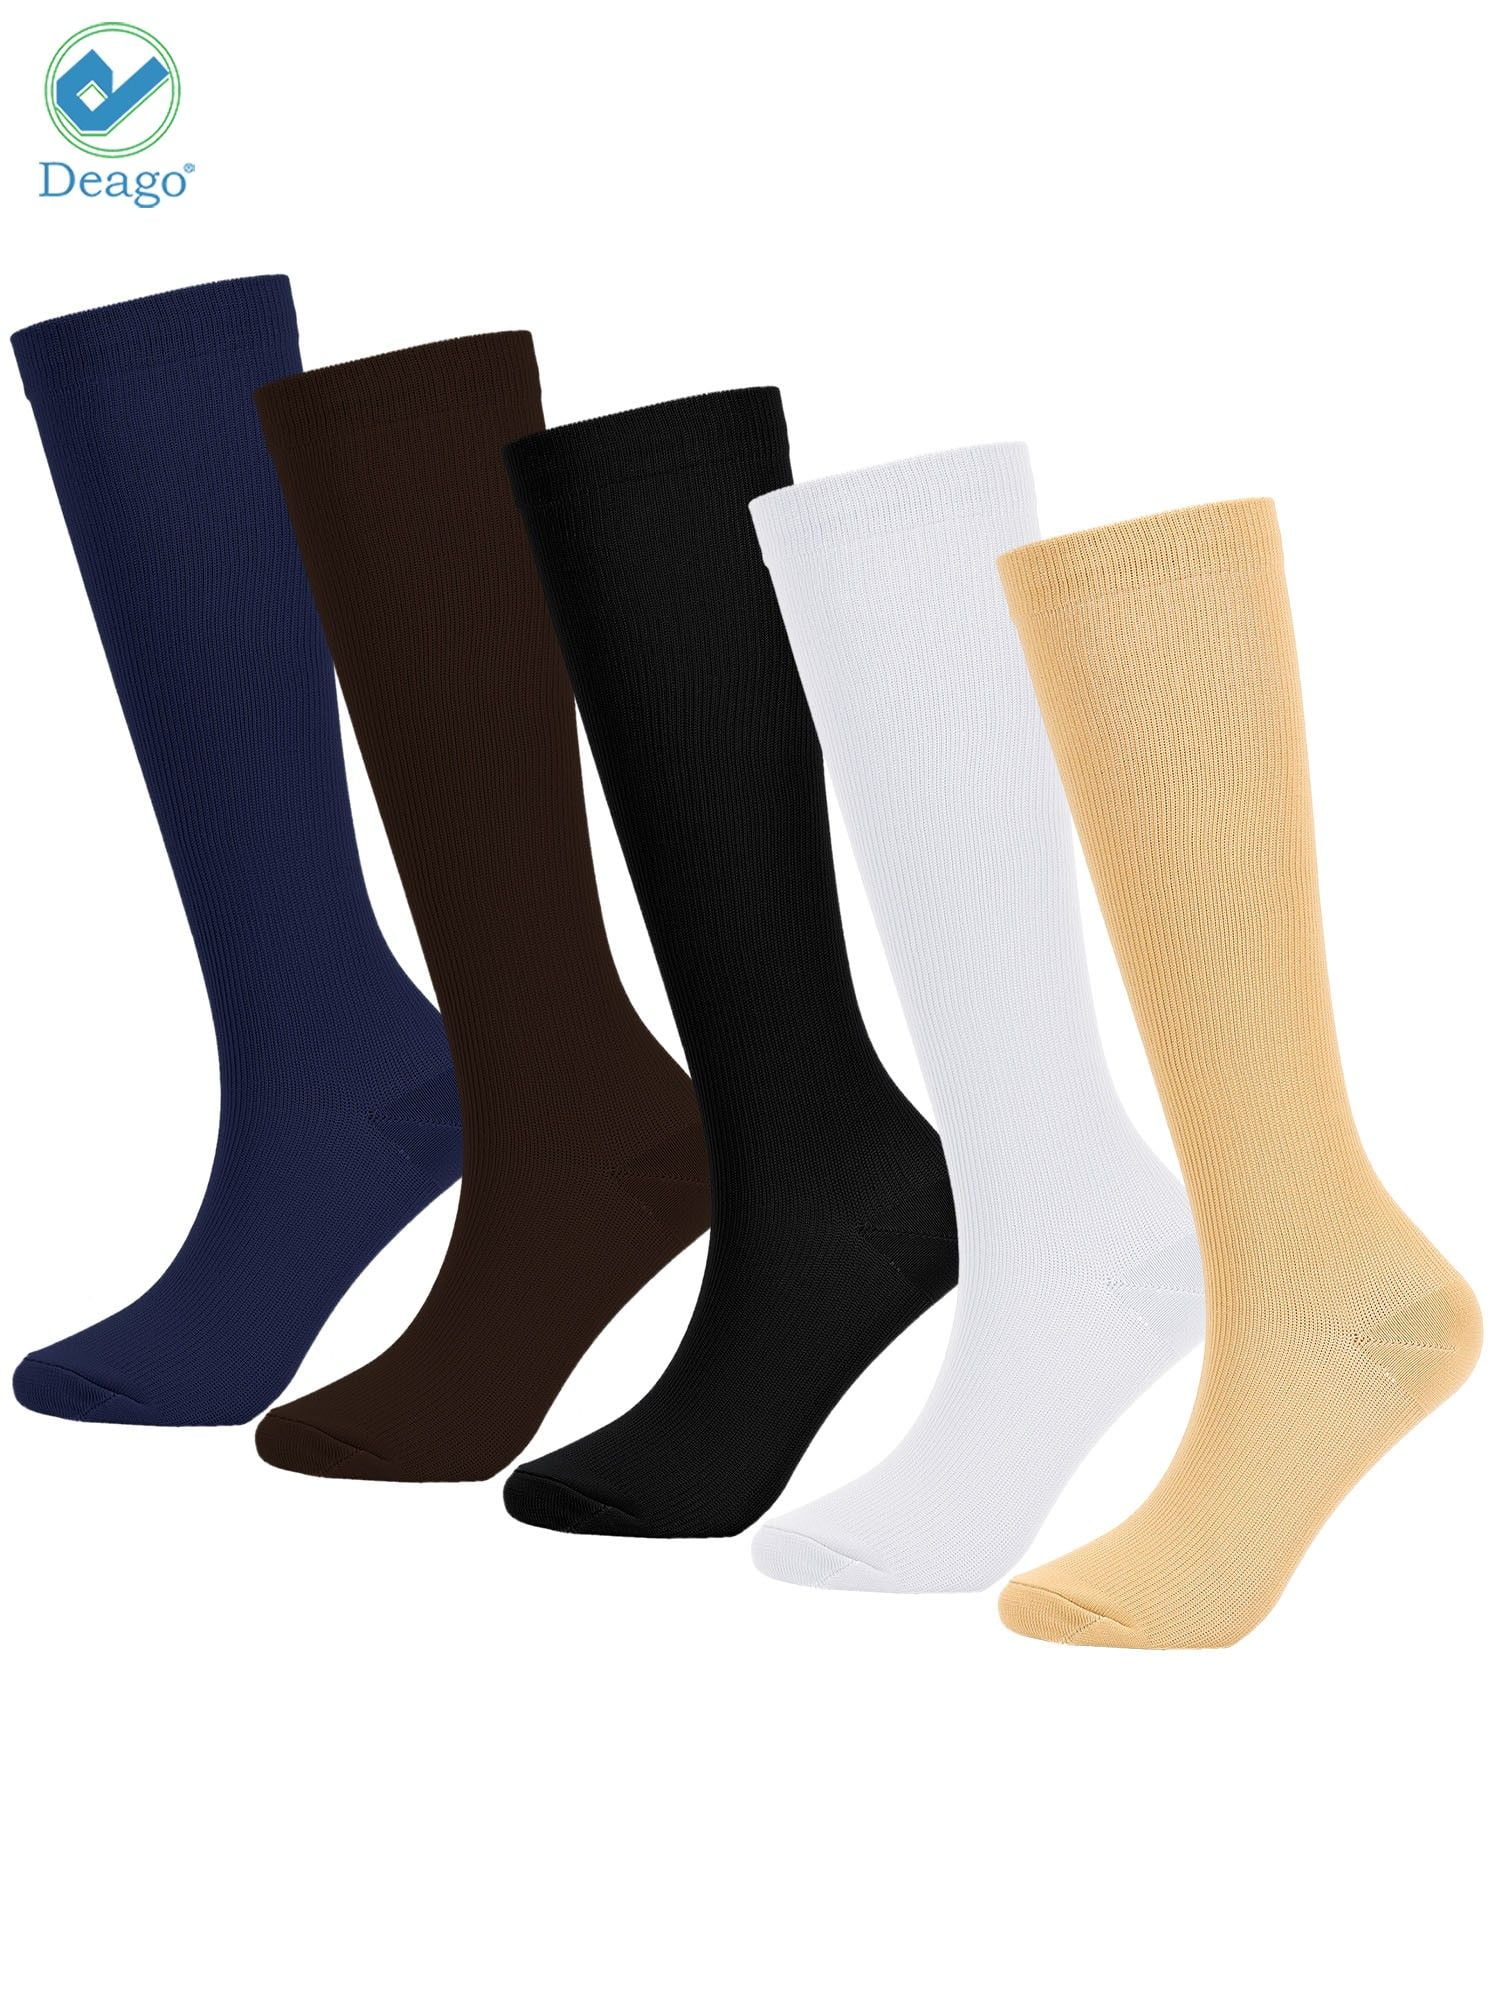 1 Pair Lg/XL Navy Graduated Compression Socks Support Stockings Men's Women's 